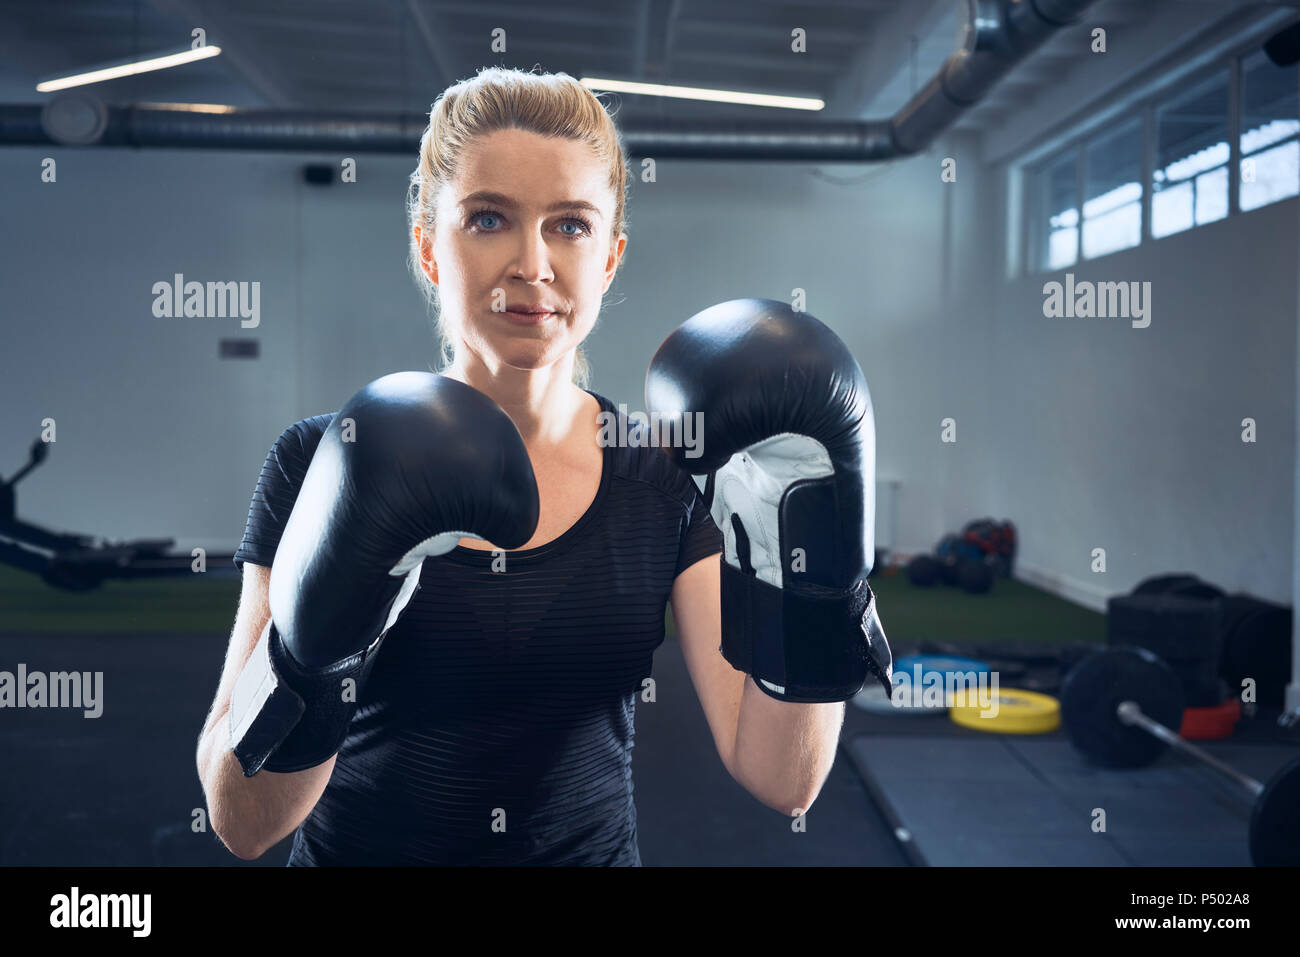 Portrait of woman practicing boxing at gym Banque D'Images